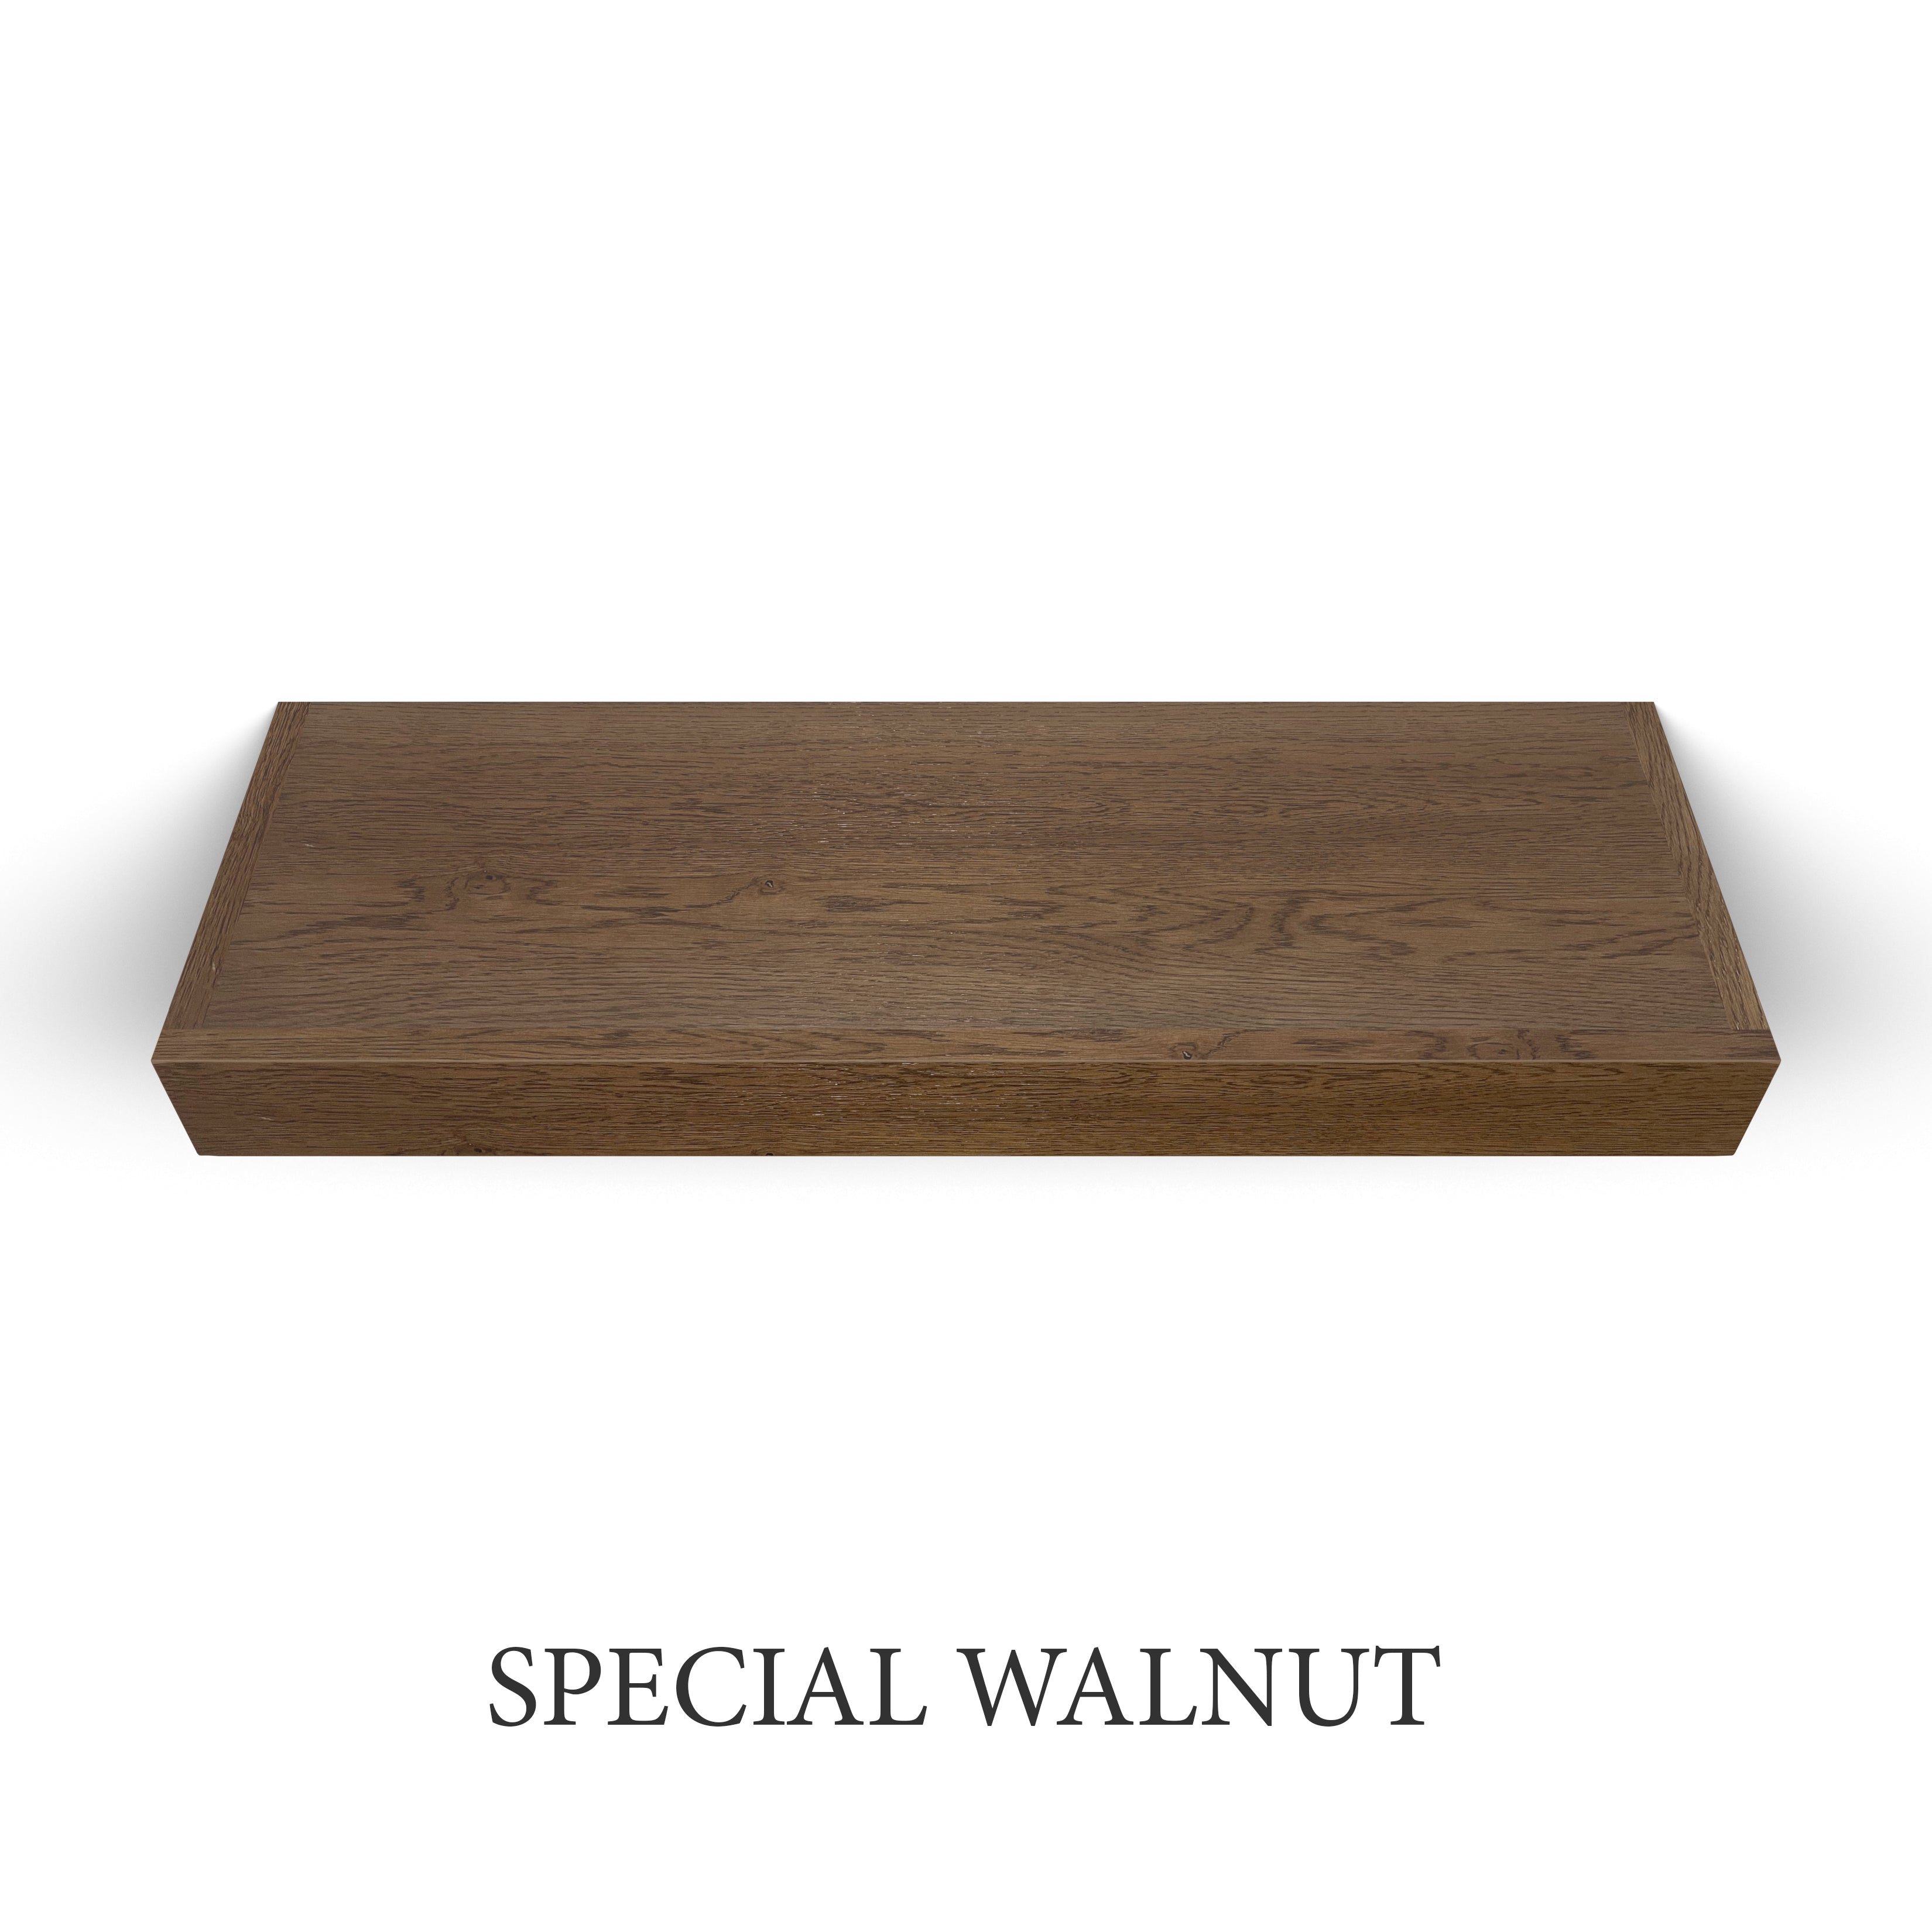 special walnut White Oak 3 Inch Thick LED Lighted Floating Shelf - Hardwired